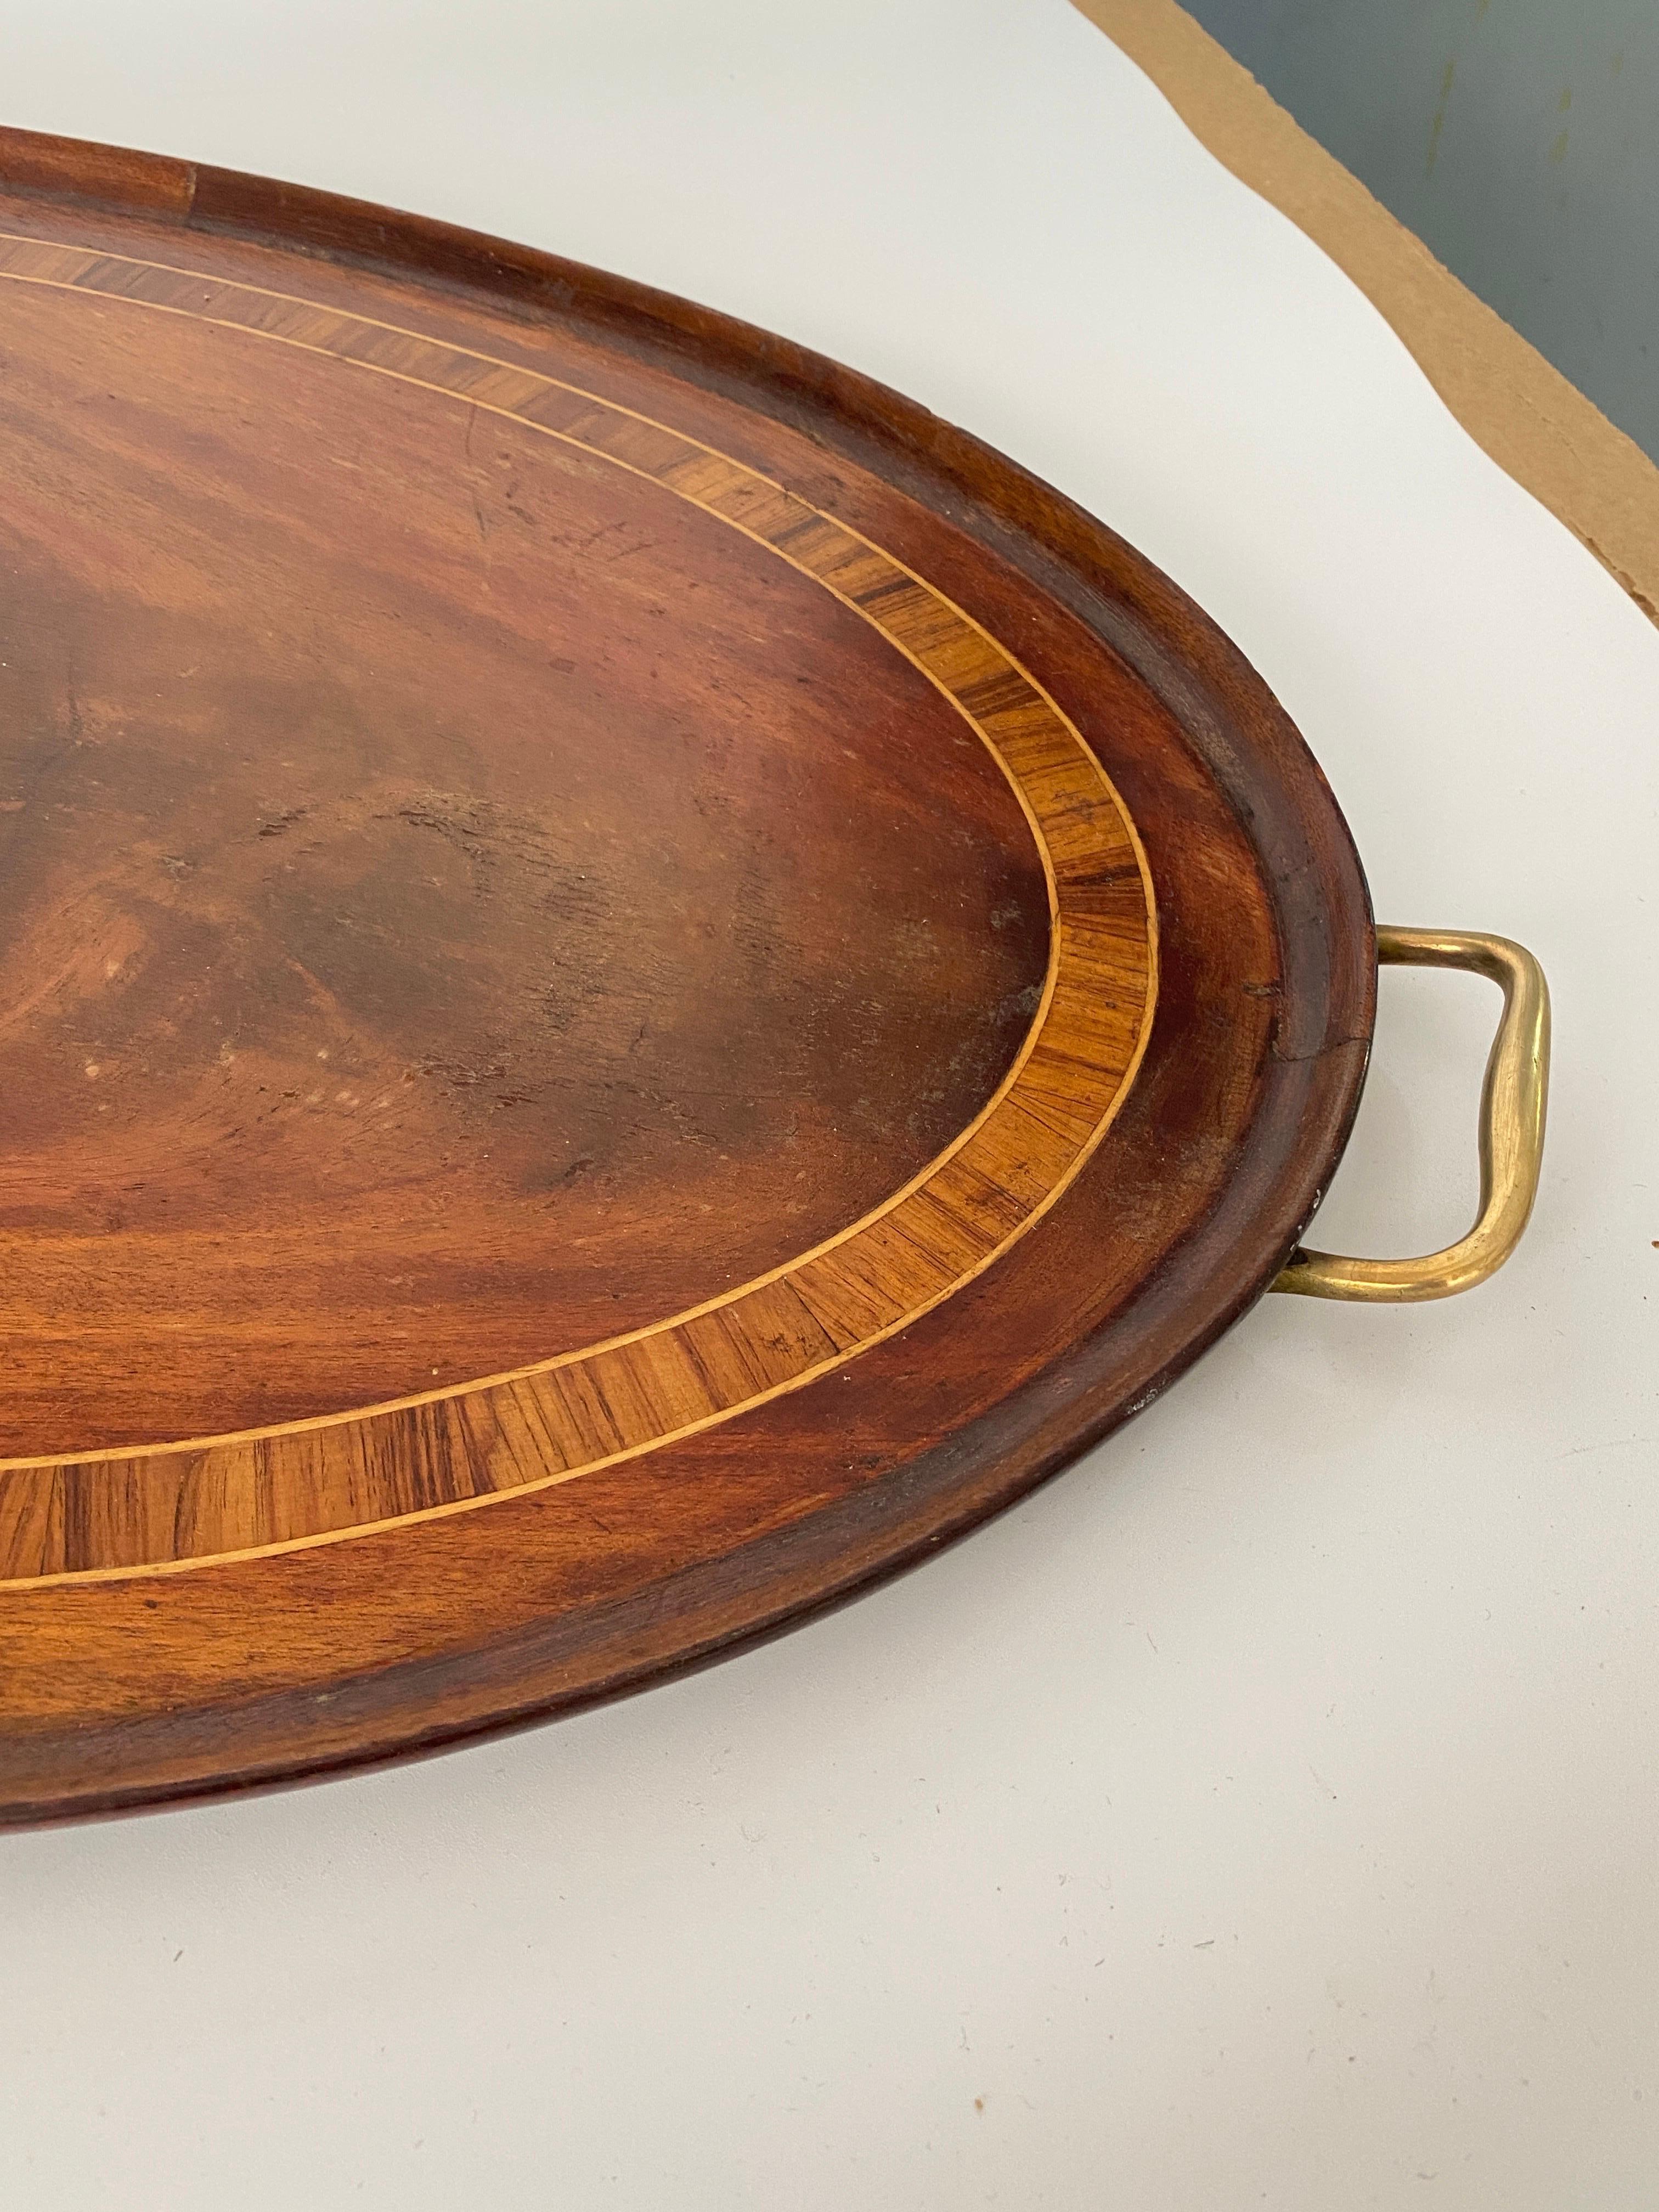 Large Art Deco Wood Marquetry Tray, Brown Color, Wood and Brass, France, 1940 For Sale 1